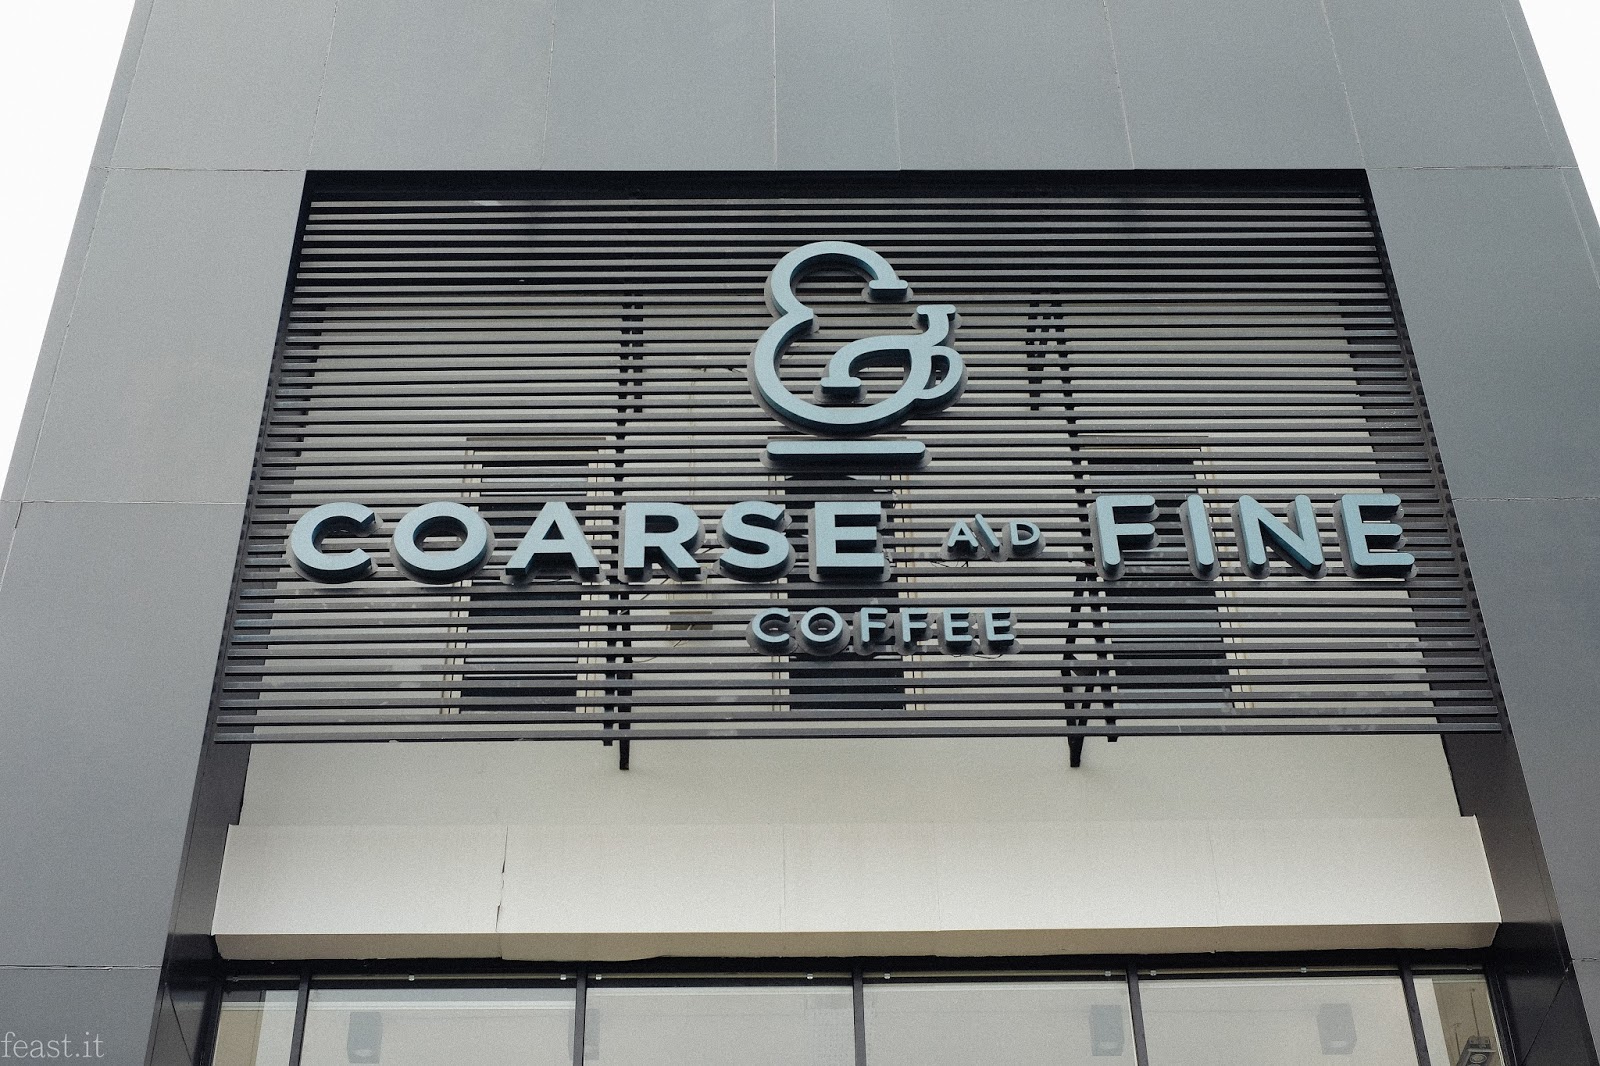 Feast.it - Indonesia Food and travel blogger : COARSE AND FINE COFFEE